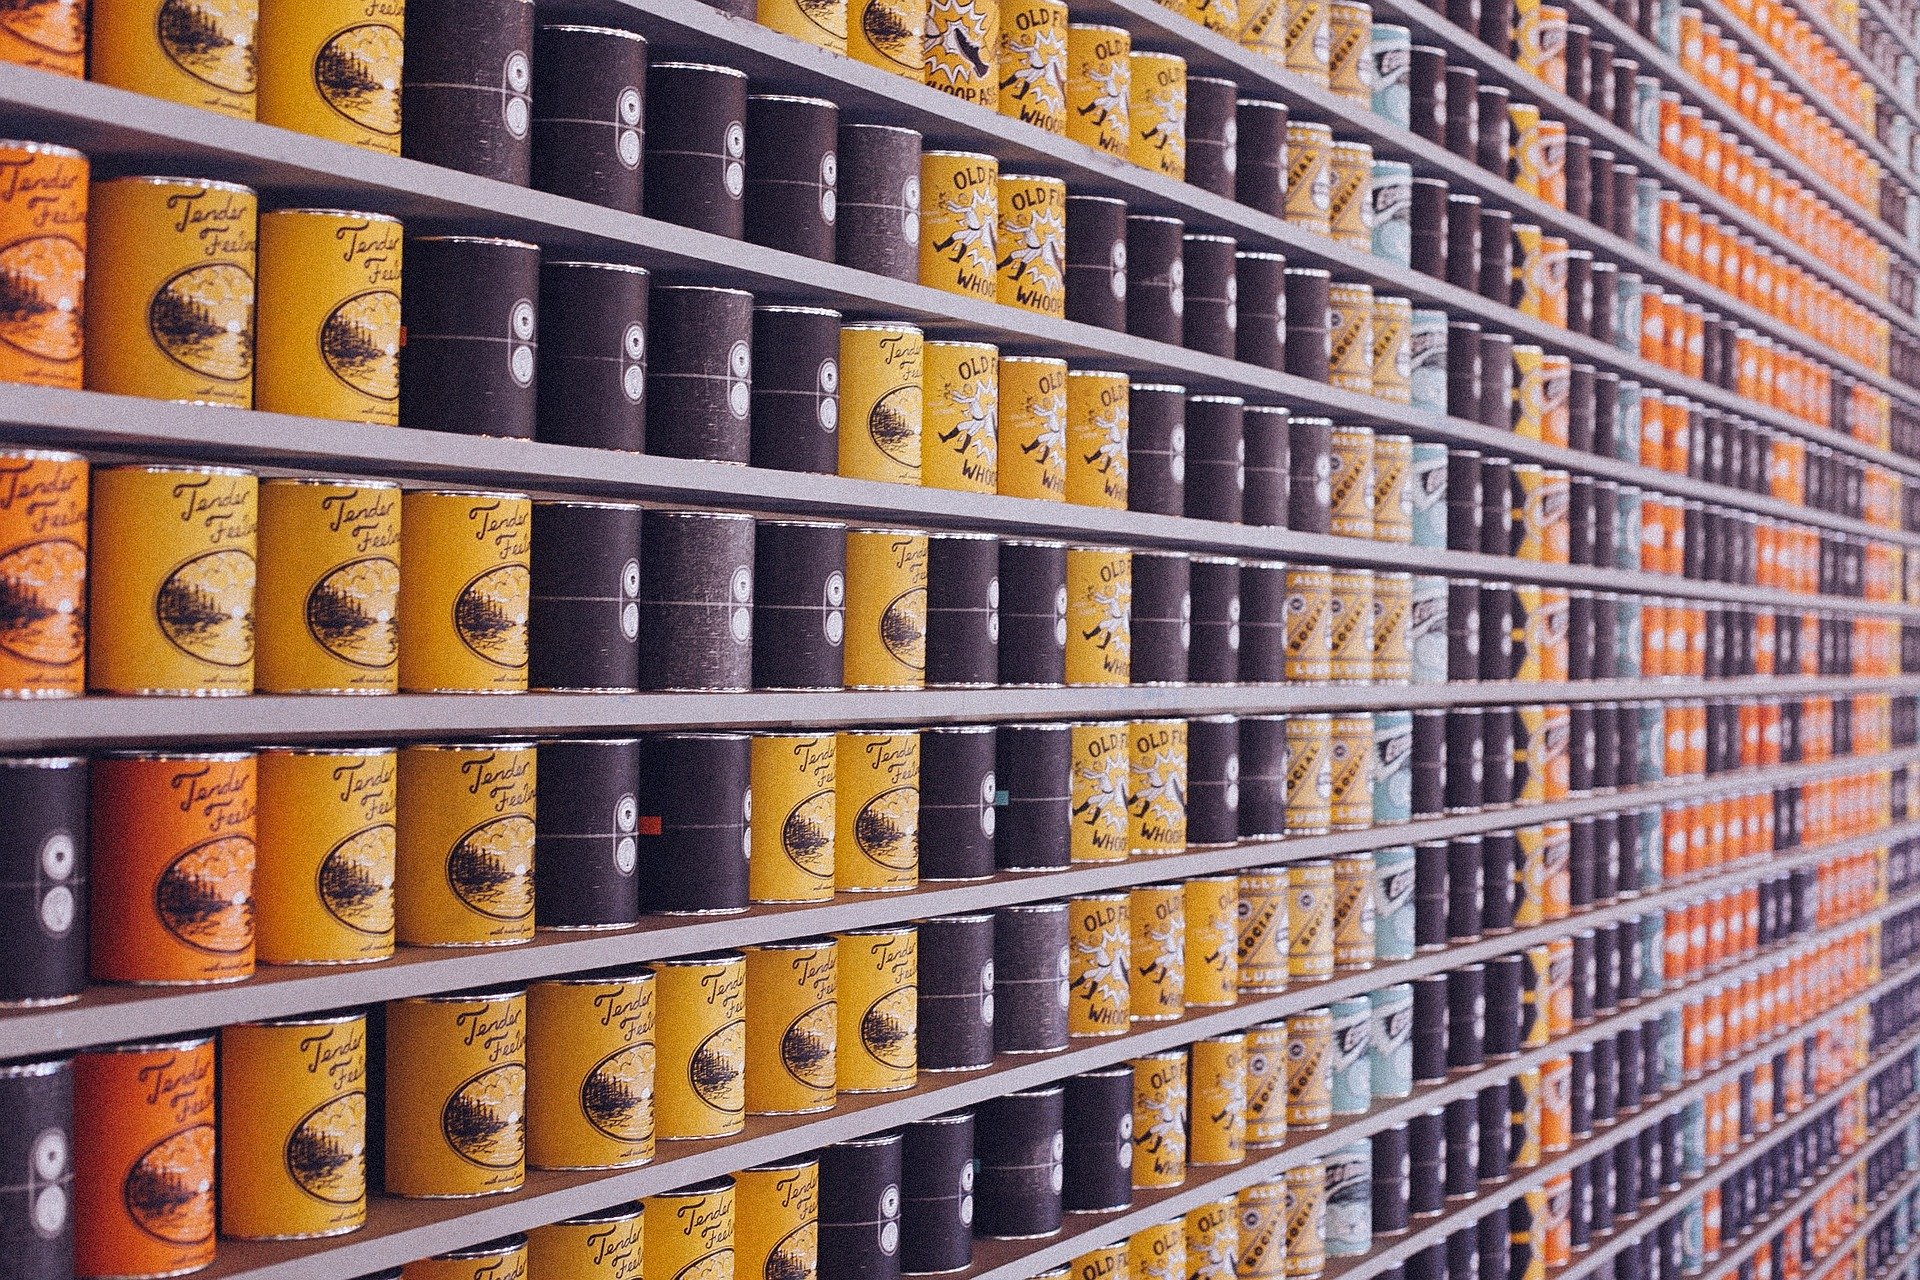 canned-food-570114_1920 Creative Commons PublicDomainArchive from Pixabay